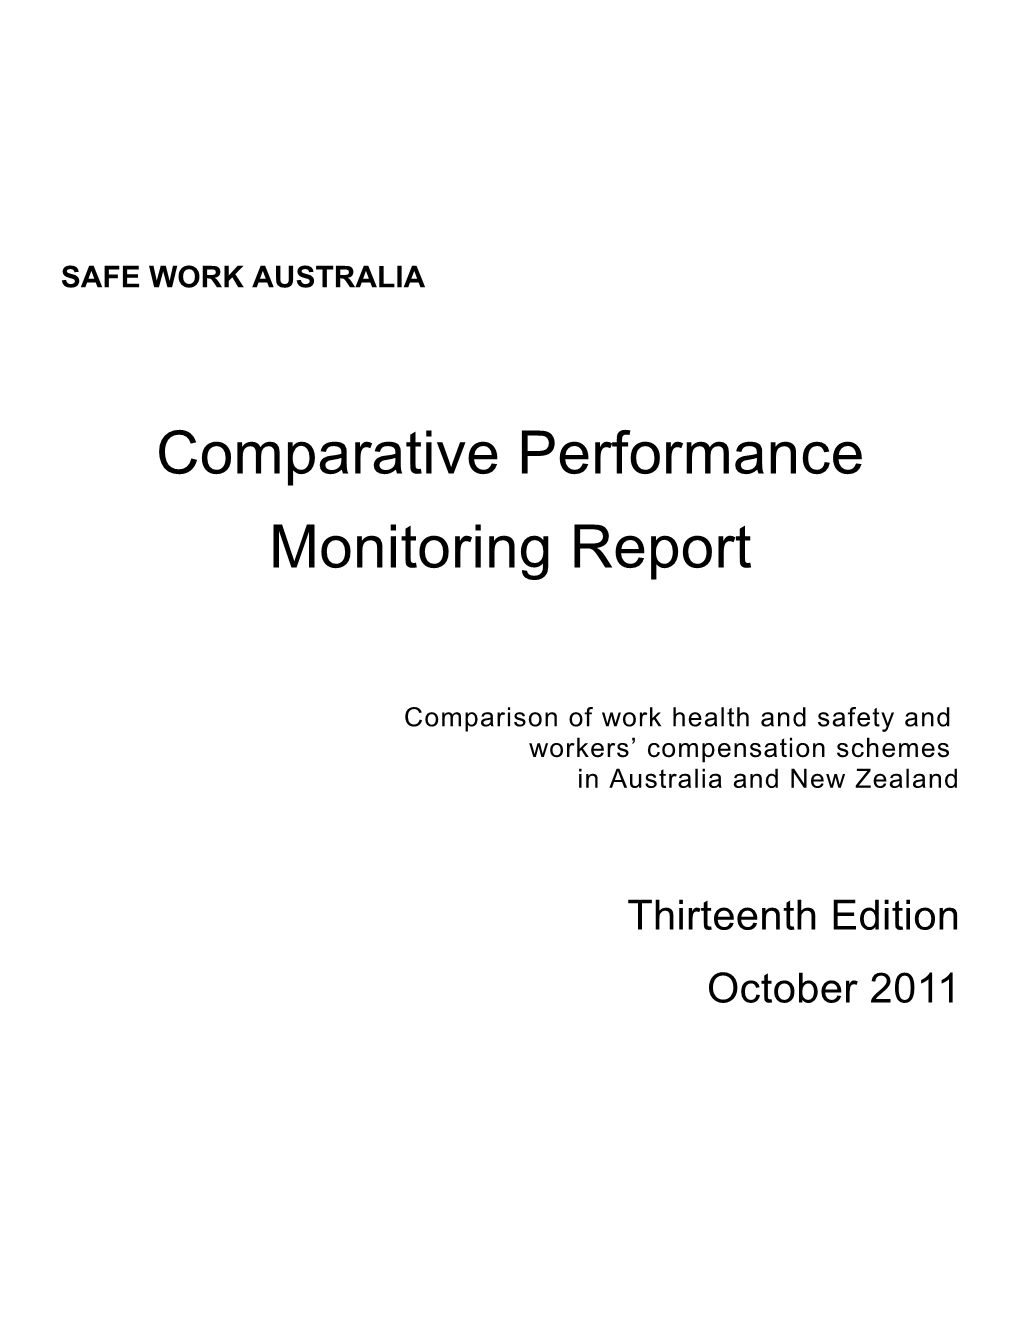 Comparative Performance Monitoring Report 13Th Edition